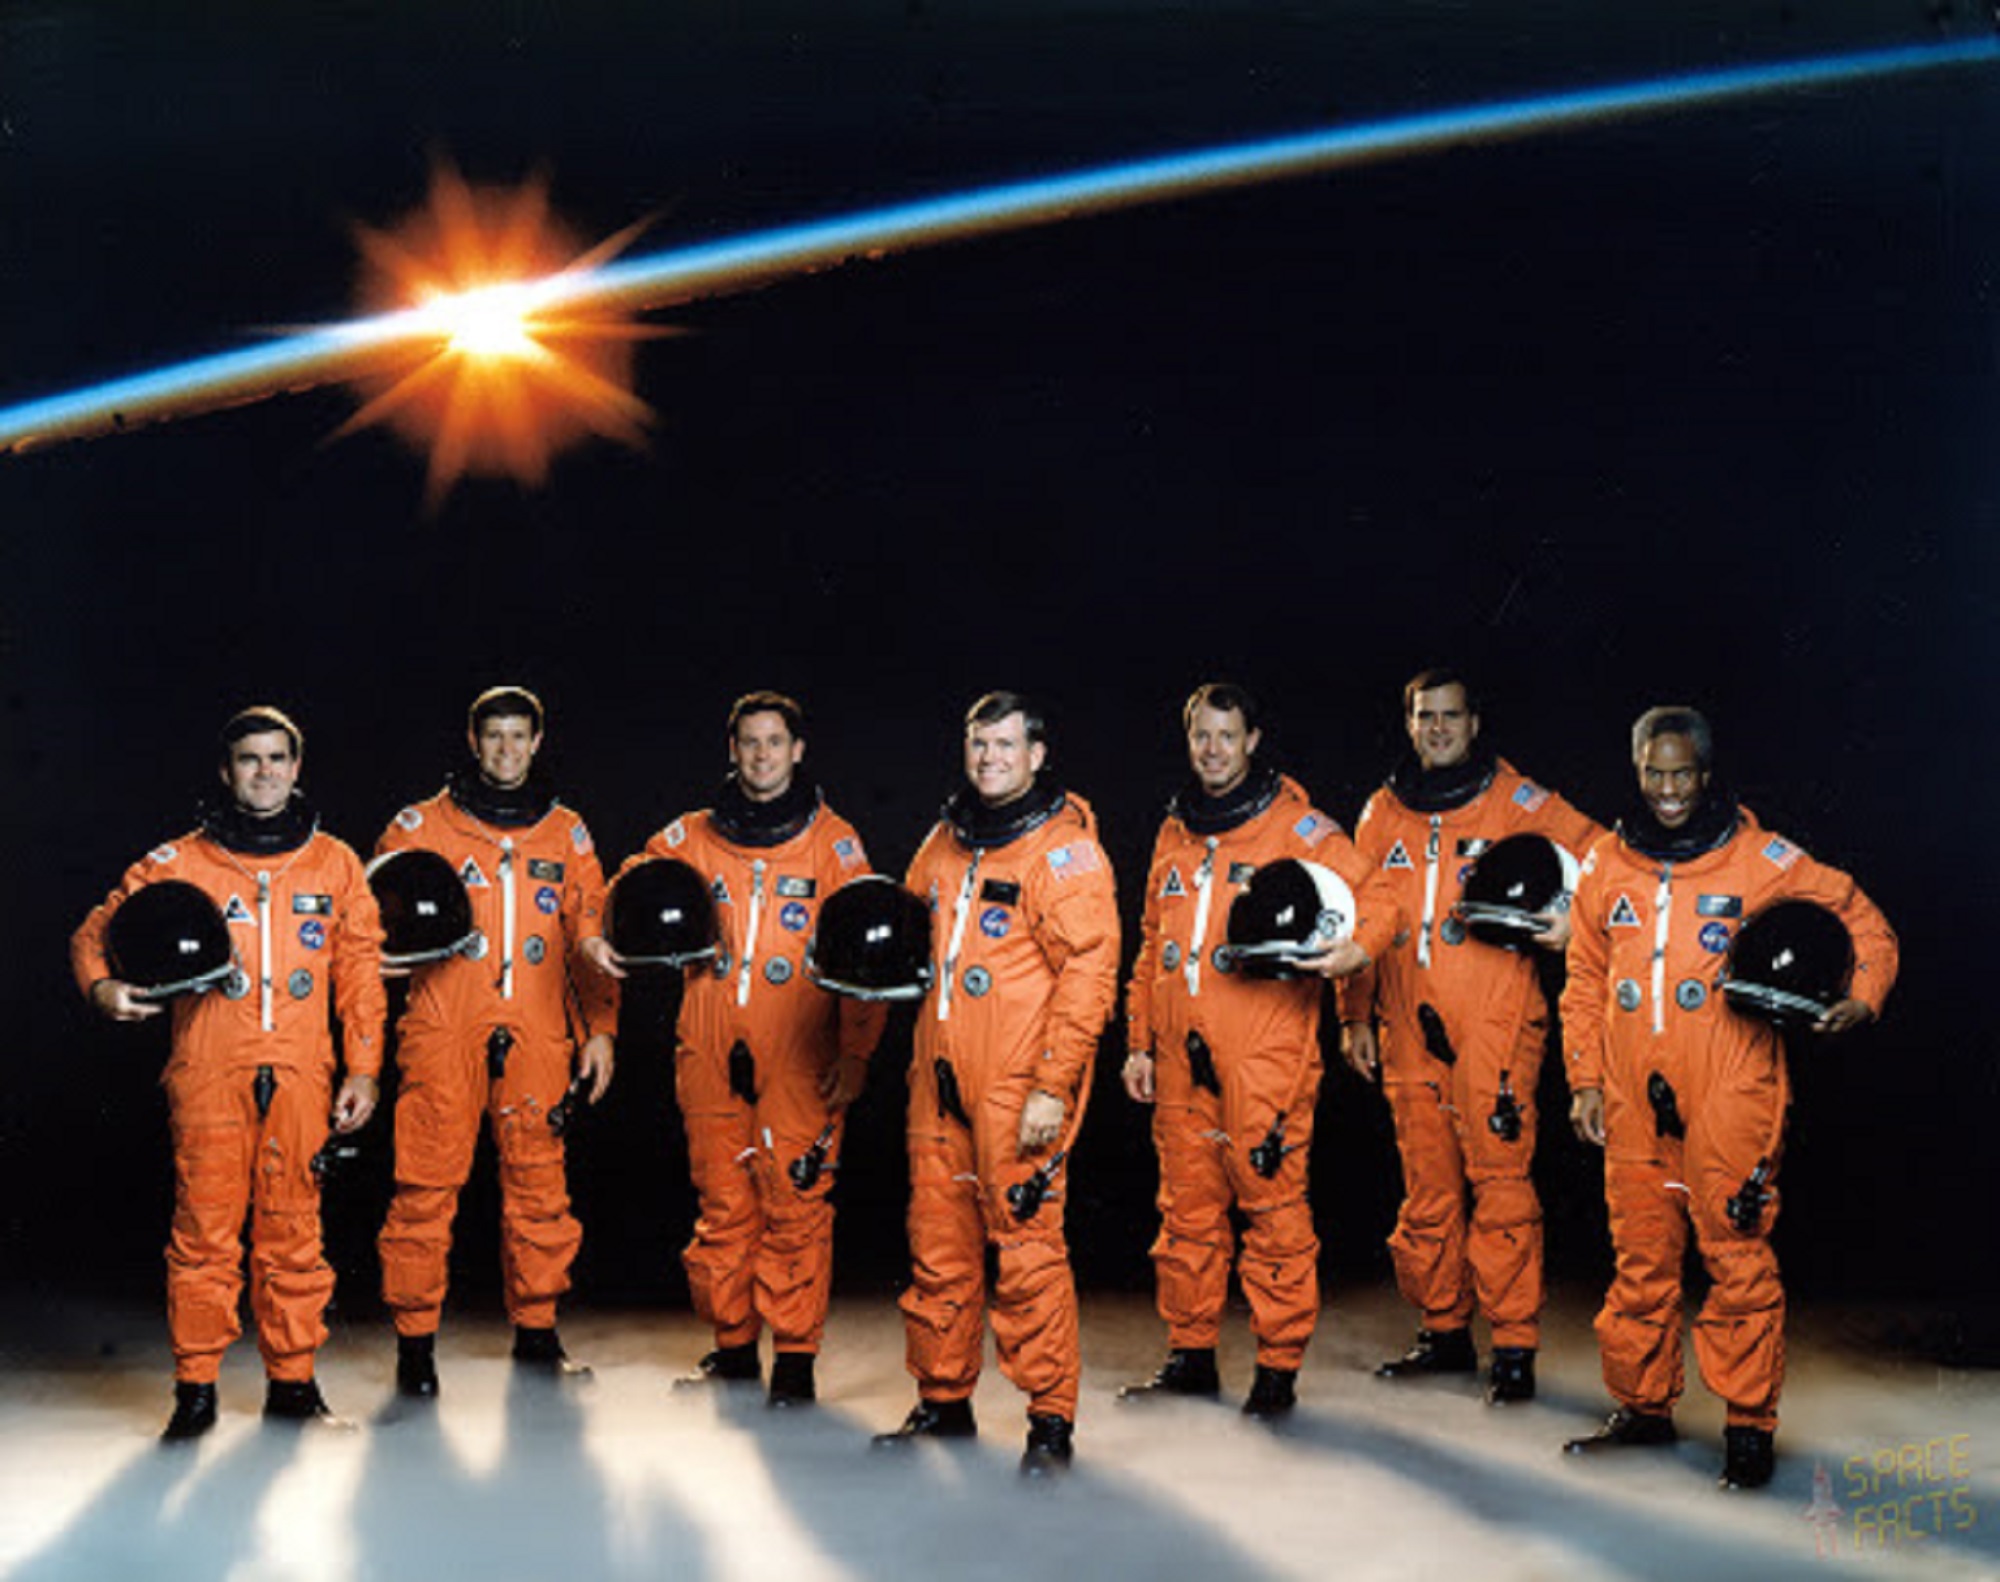 The NASA STS-39 shuttle crew in orange astronaut suits on a space backdrop